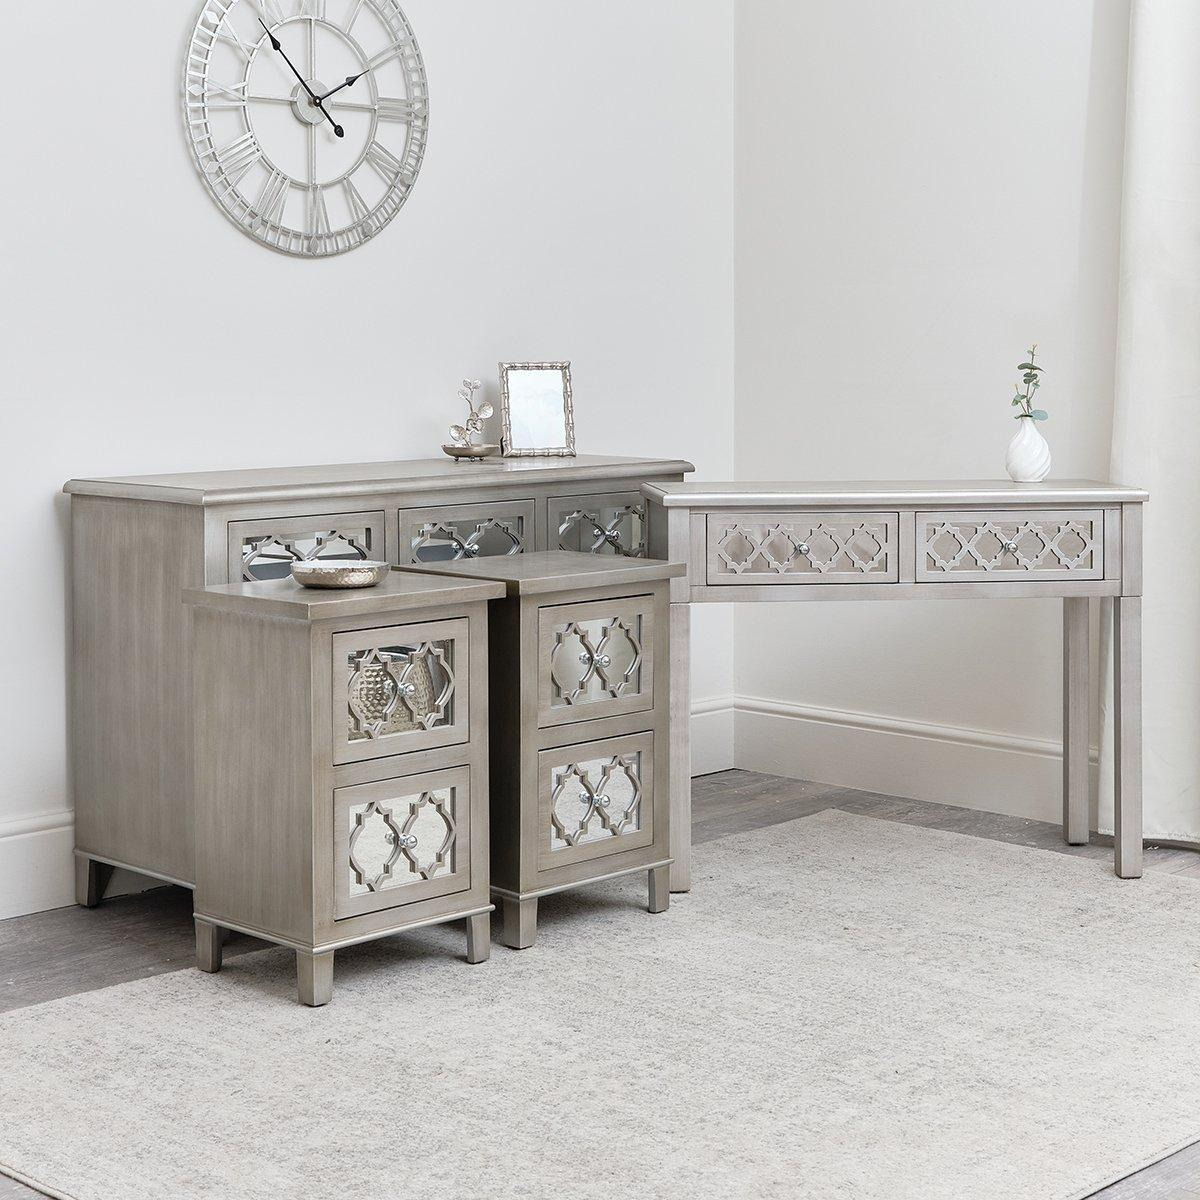 7 Drawer Chest Of Drawers, Console Table & Pair Of Bedsides - Sabrina Silver Range - image 1